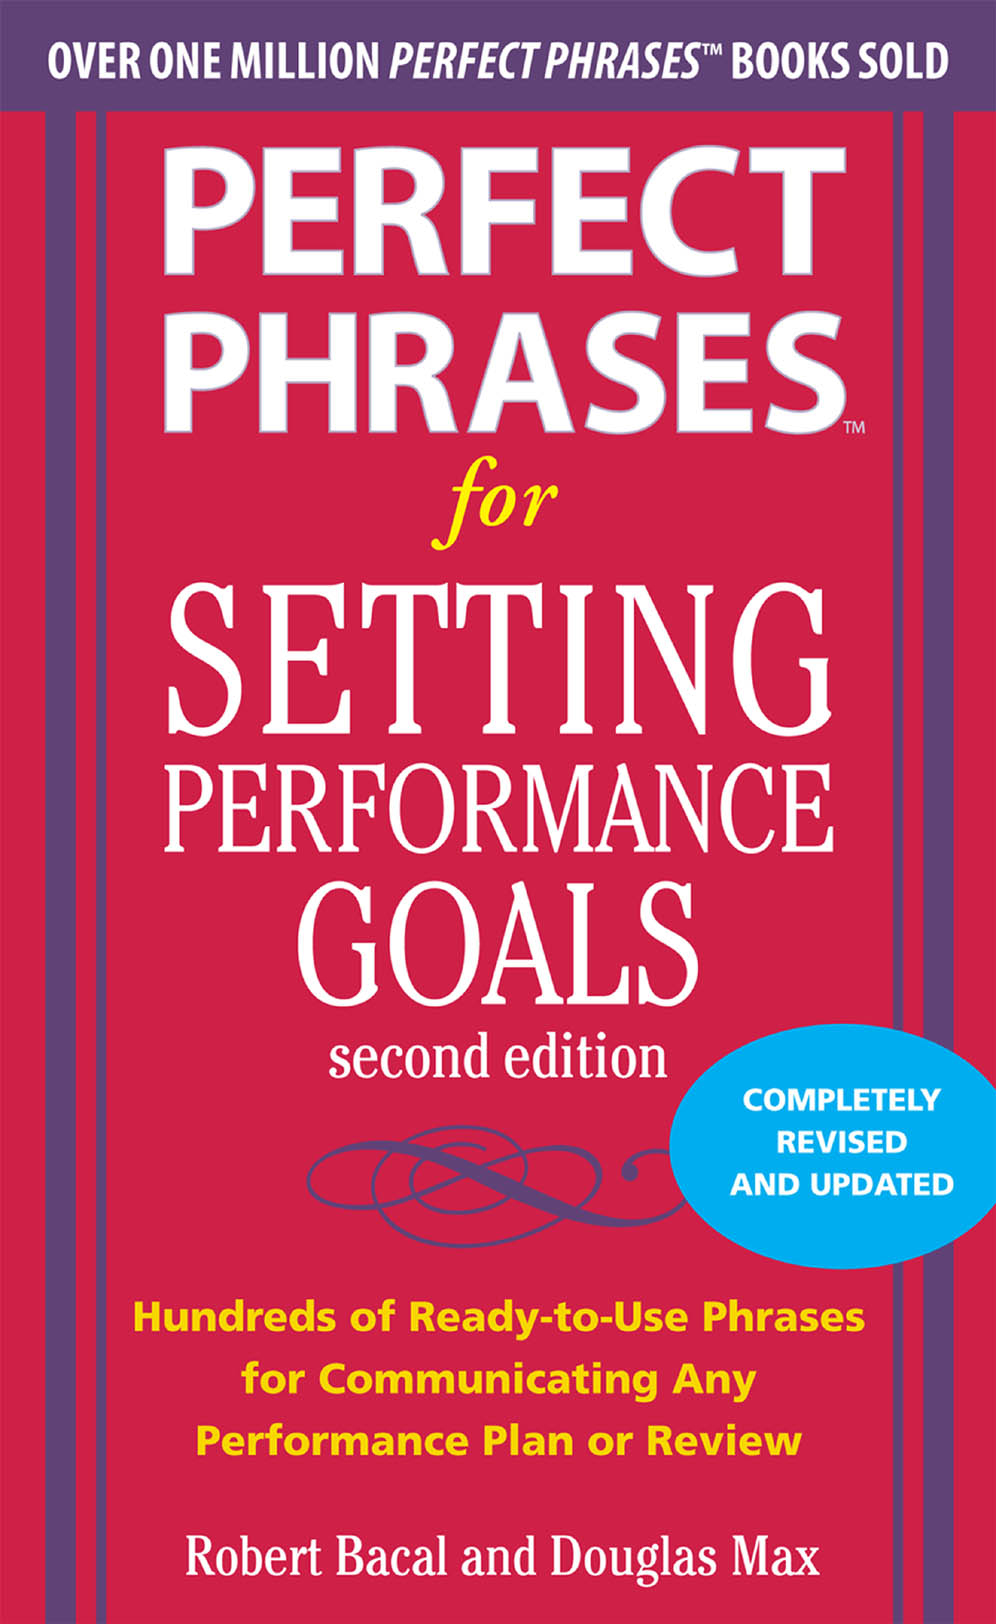 Perfect Phrases for Setting Performance Goals, Second Edition - 10-14.99